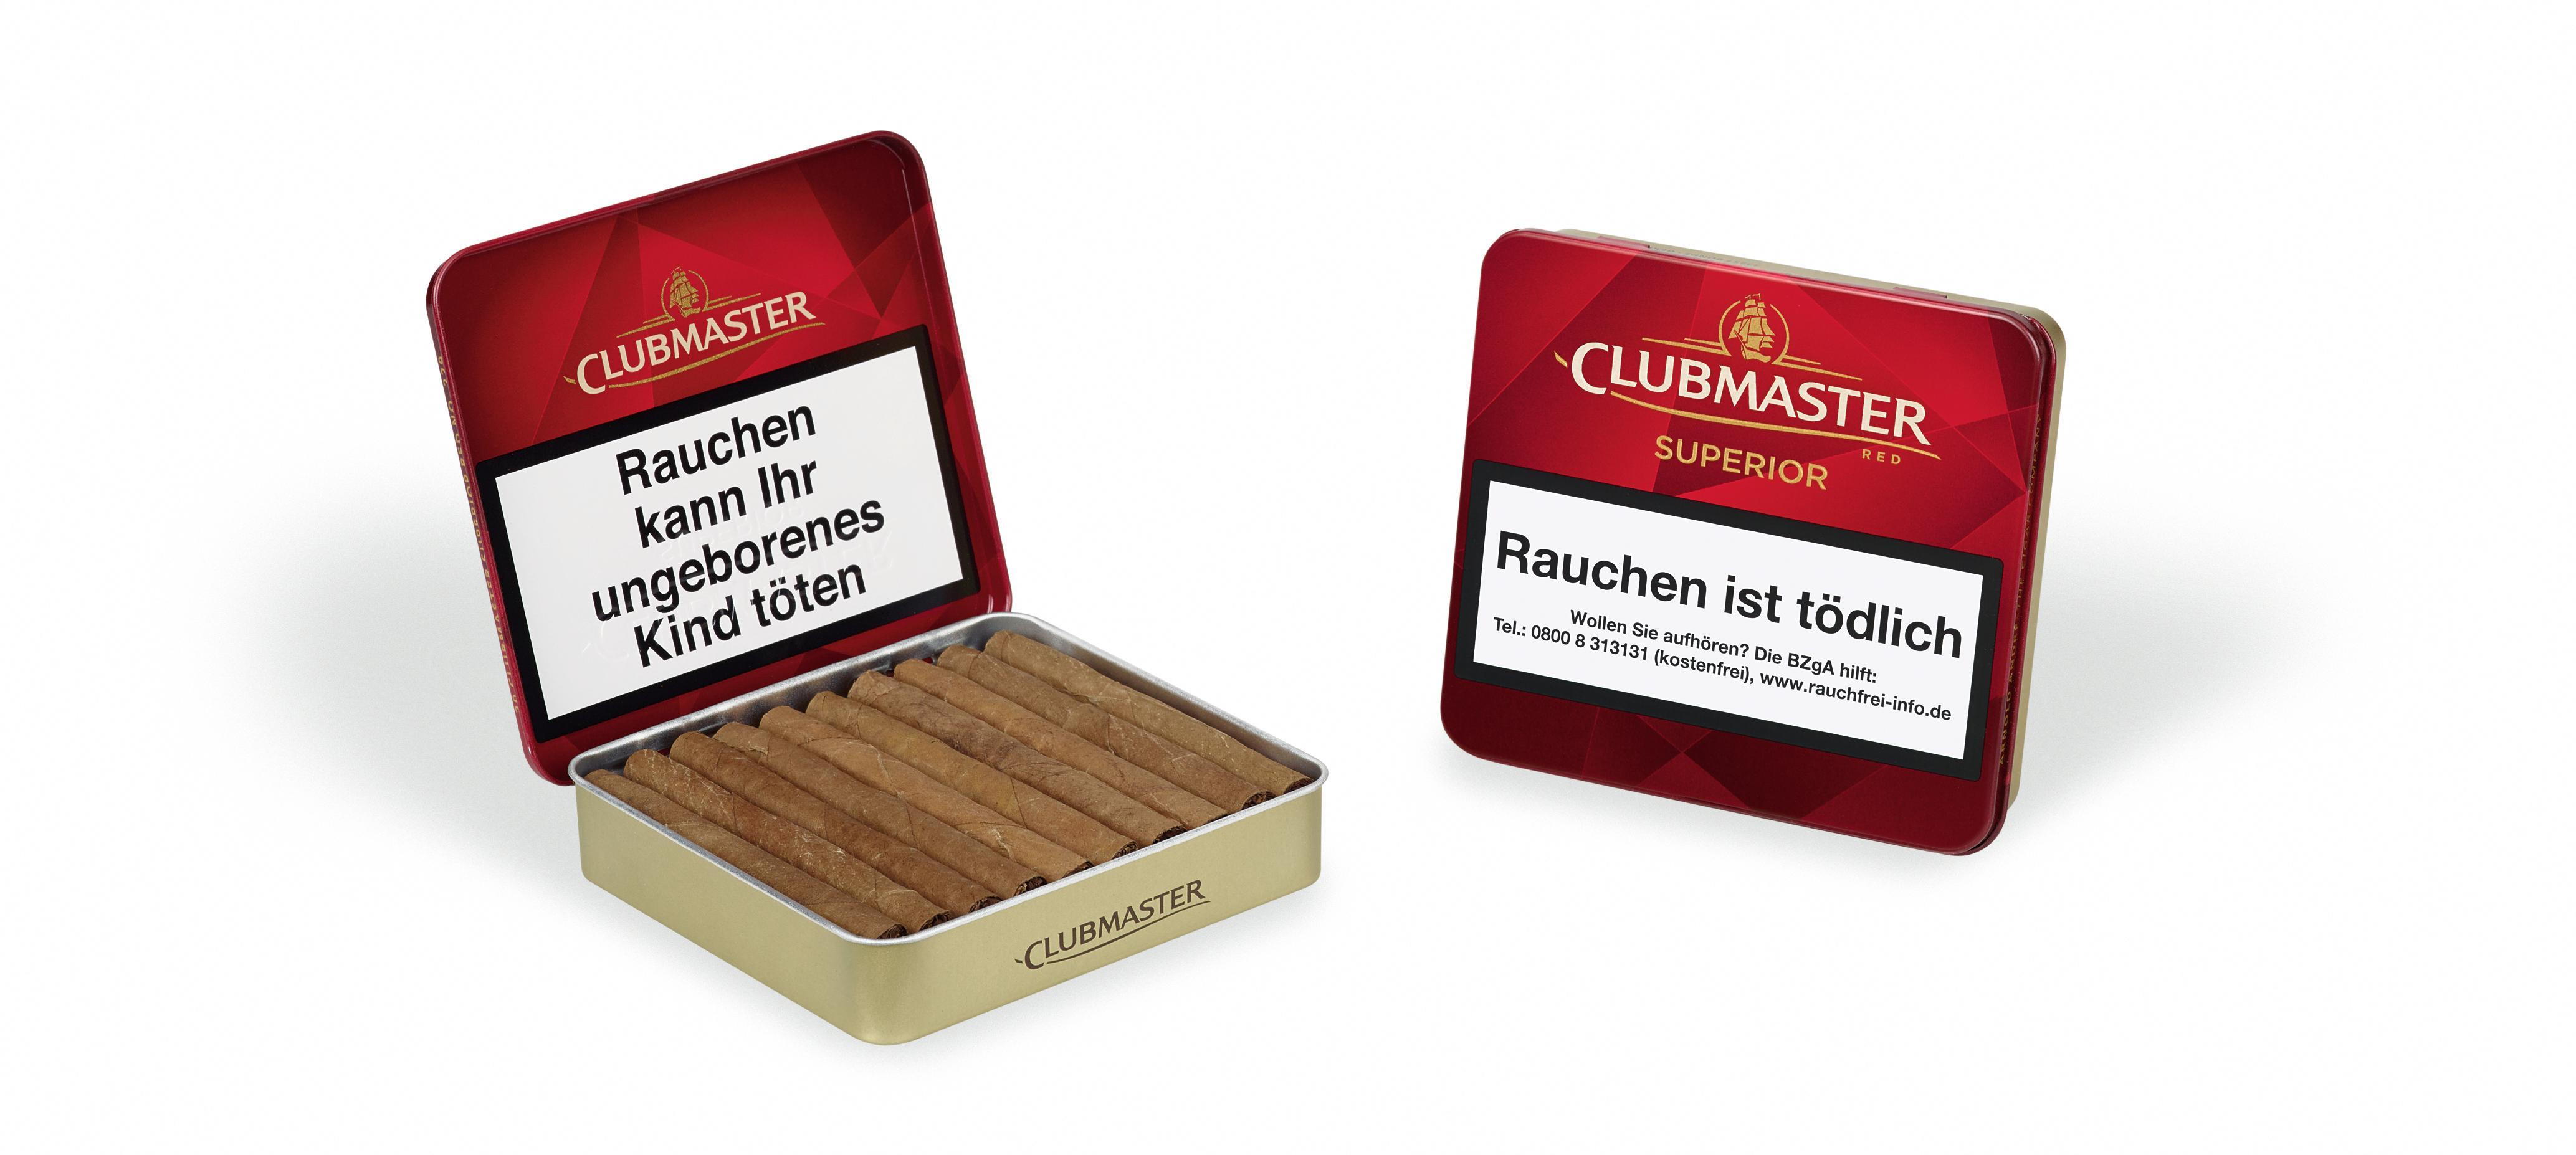 Clubmaster Superior Red ohne Filter Nr. 229 5 x 20 Zigarillos 20St